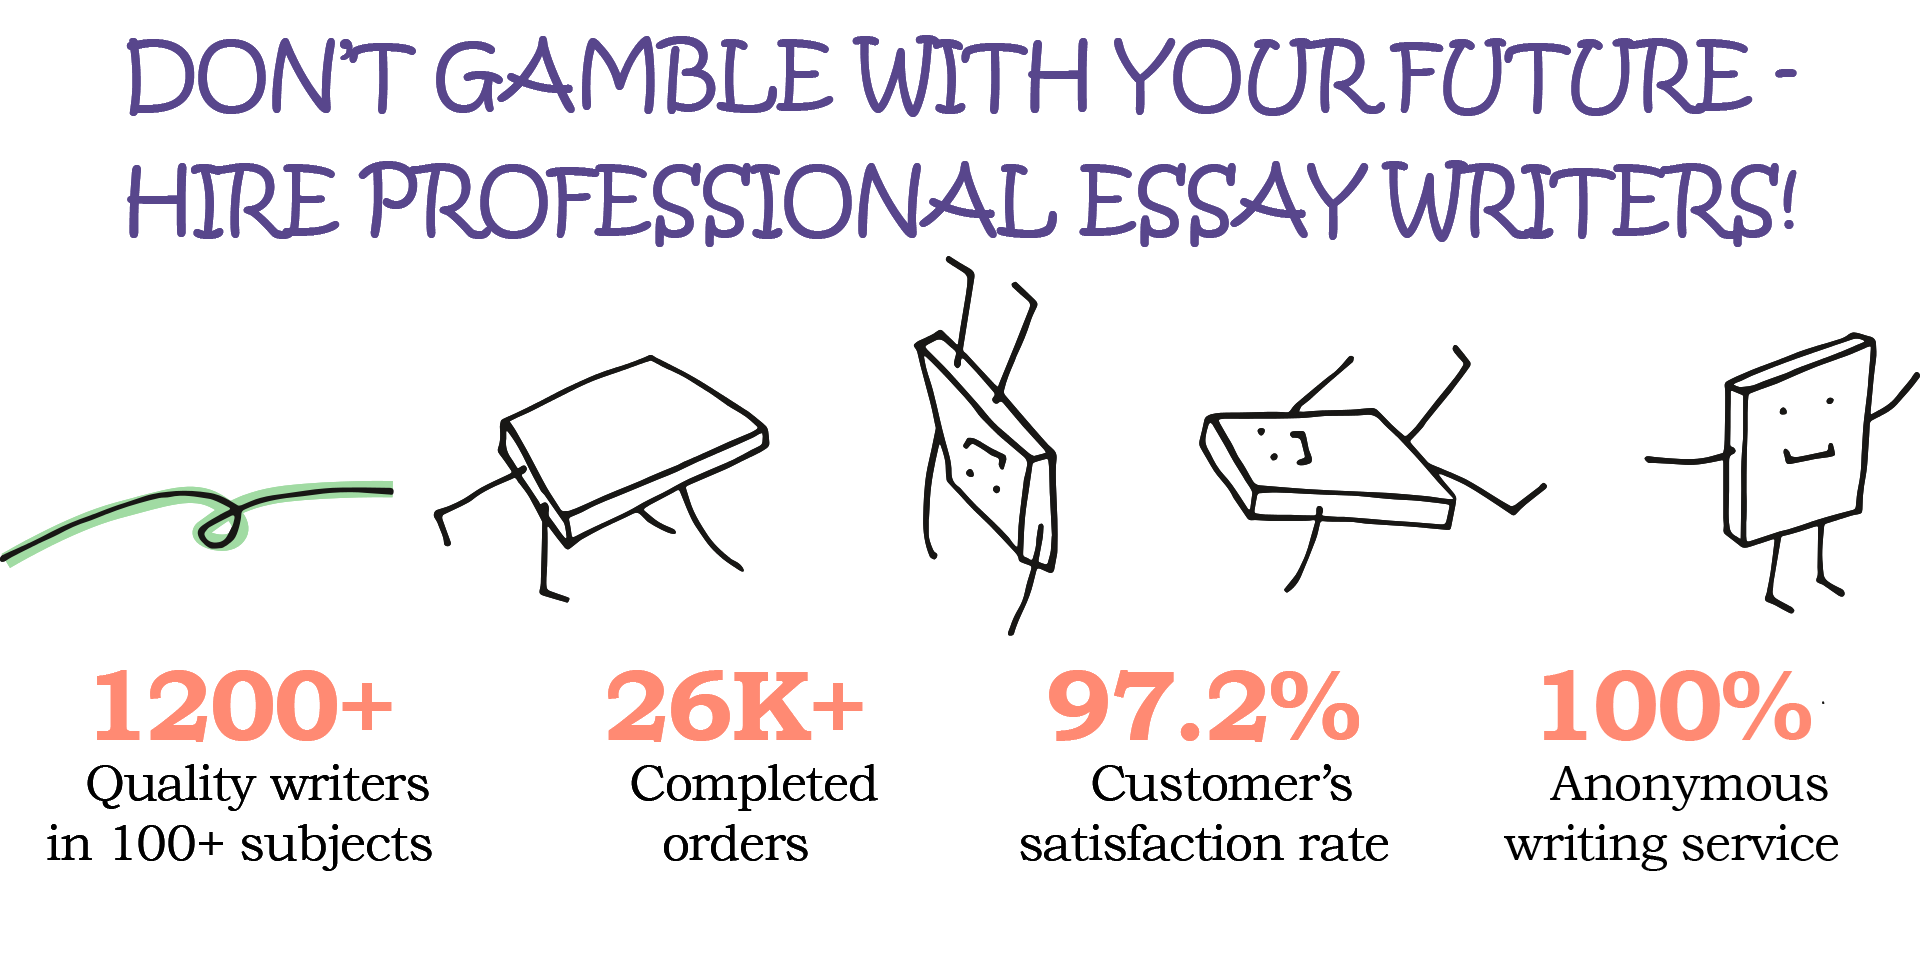 What Are The 5 Main Benefits Of essay writer